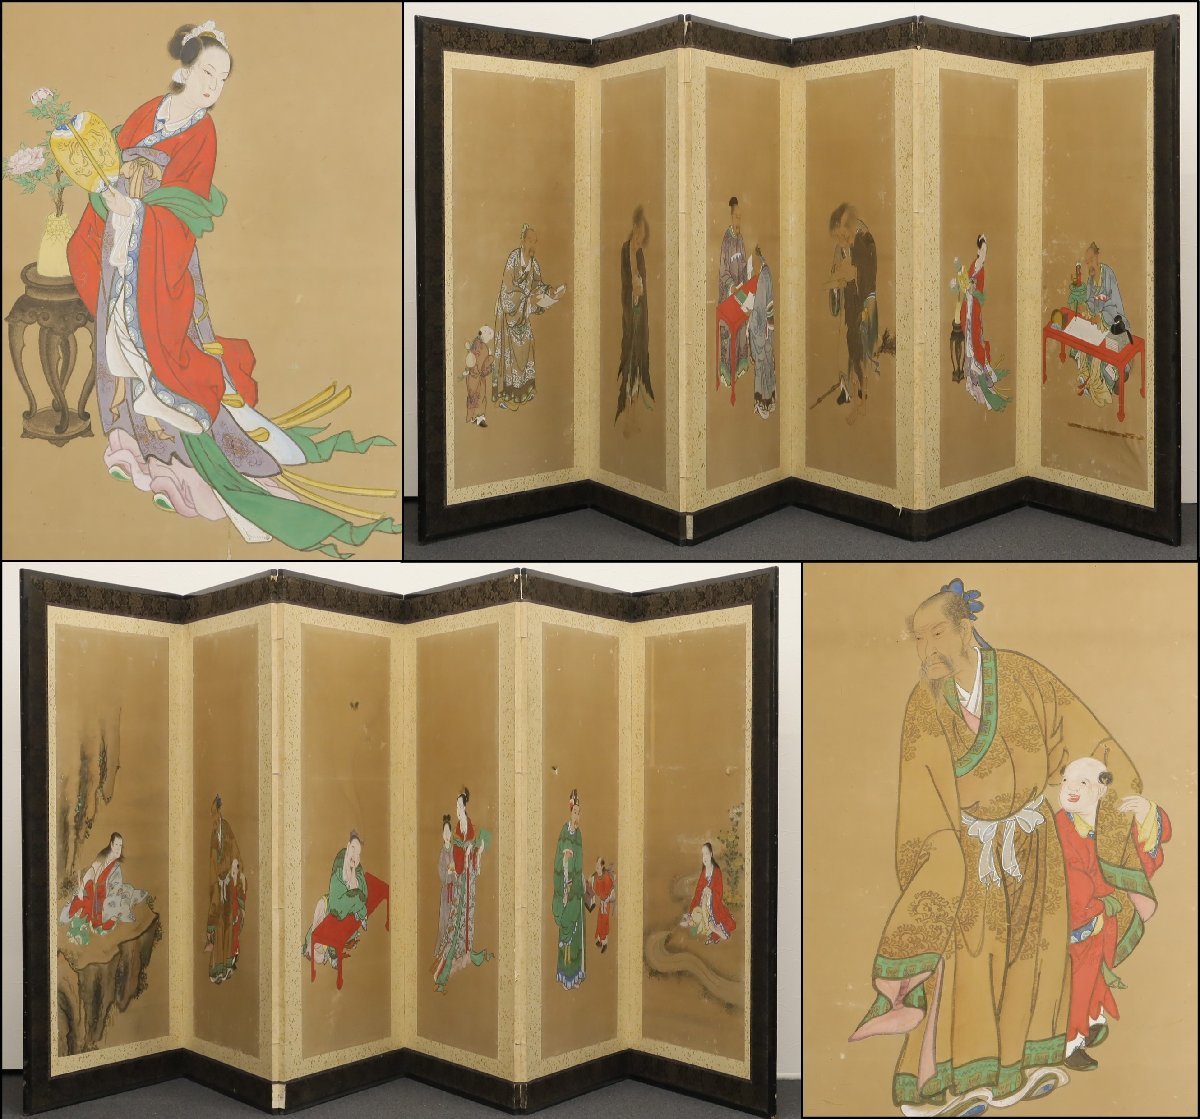 Era: Six-curved folding screen, Nanshu painting, paper book, handwriting, height approx. 130cm, ancient folding screen, unmarked, Chinese literati, Chinese figure painting, artwork, painting, portrait